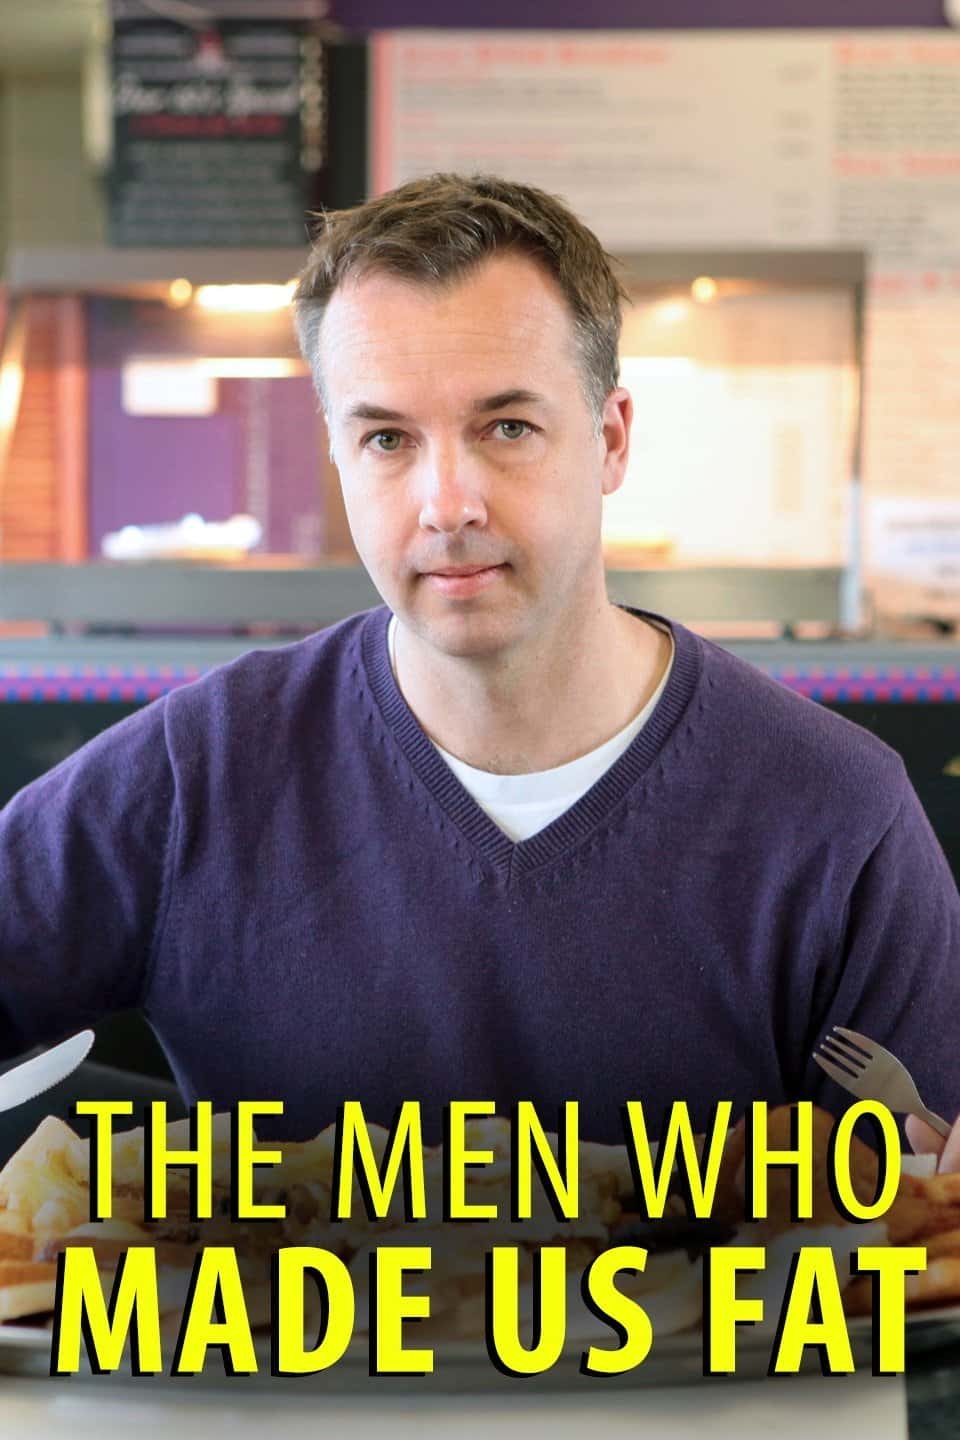 BBC̽¼Ƭ·Ԫ / The Men Who Made Us Fat-Ѹ